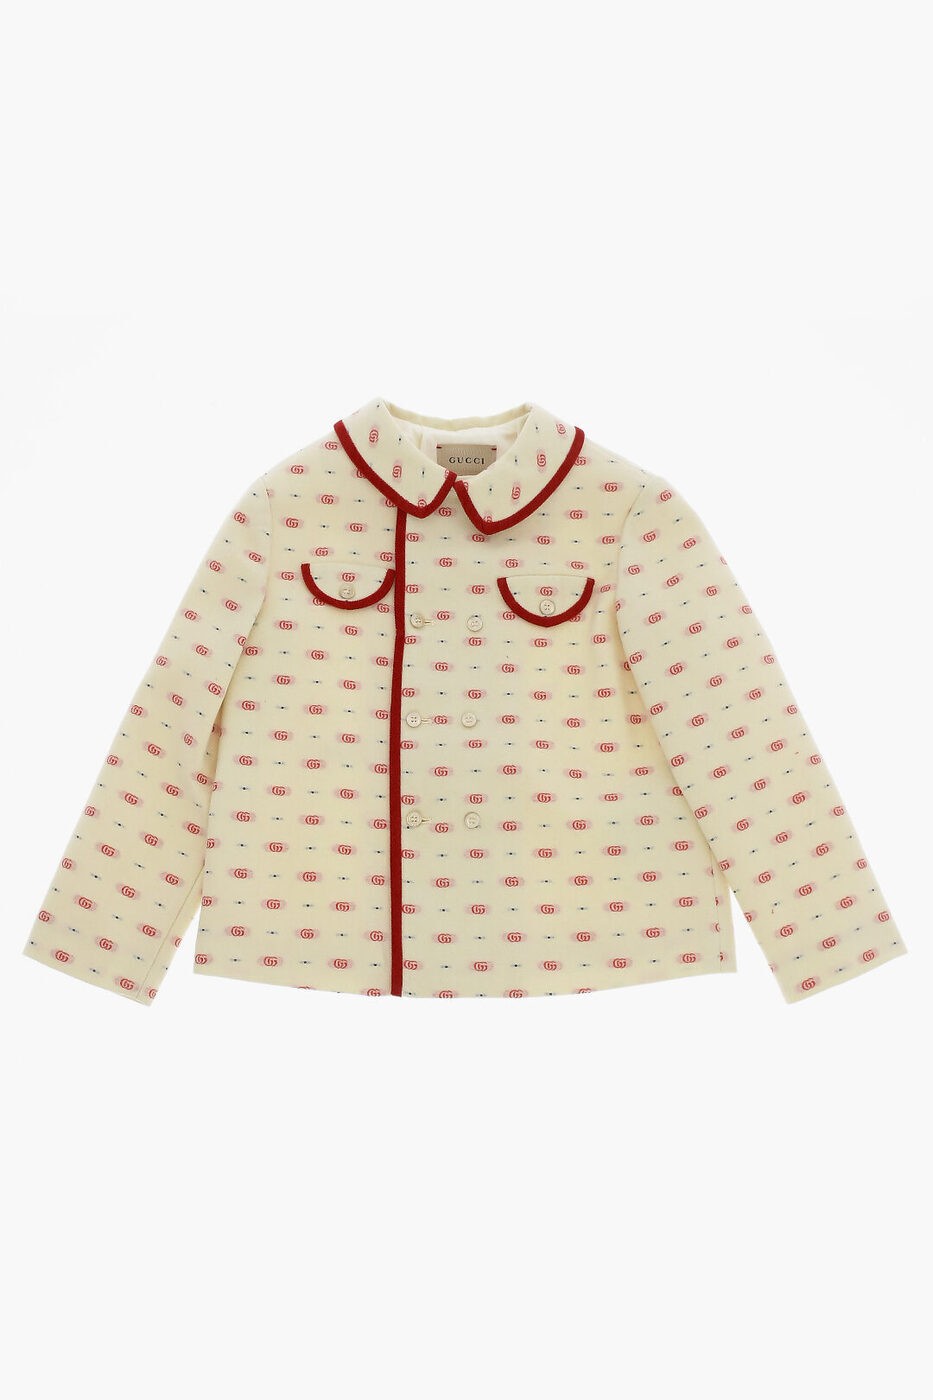 GUCCI グッチ ジャケット 701728XWATB 9120 ボーイズ ALL-OVER MONOGRAM WOOL DOUBLE BREASTED COAT 【..